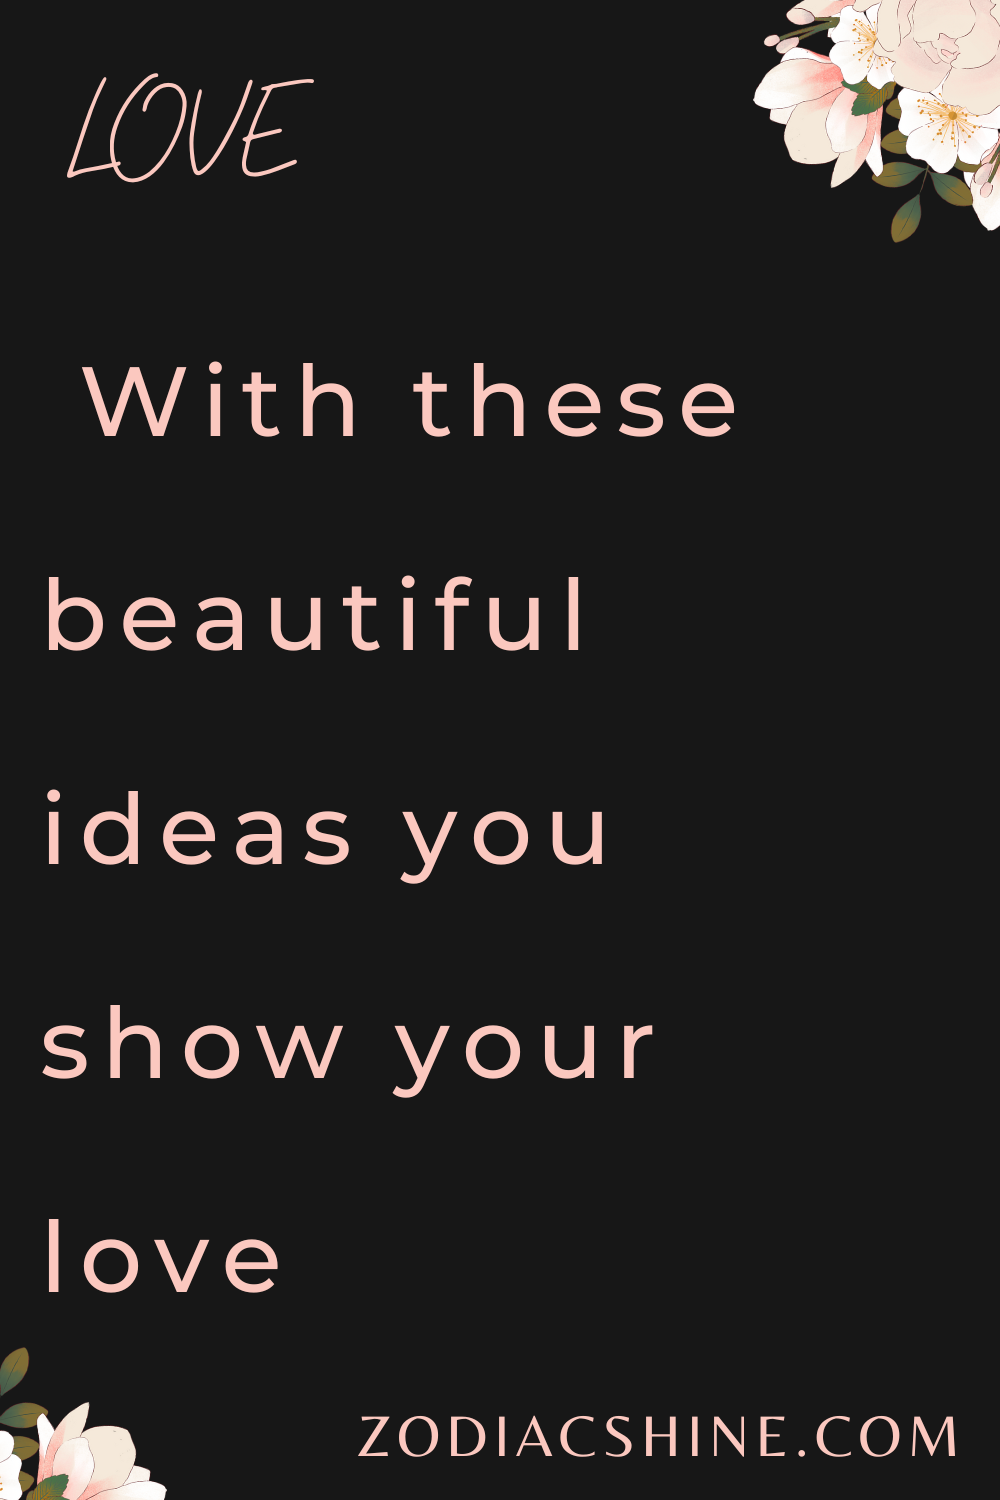 With these beautiful ideas you show your love